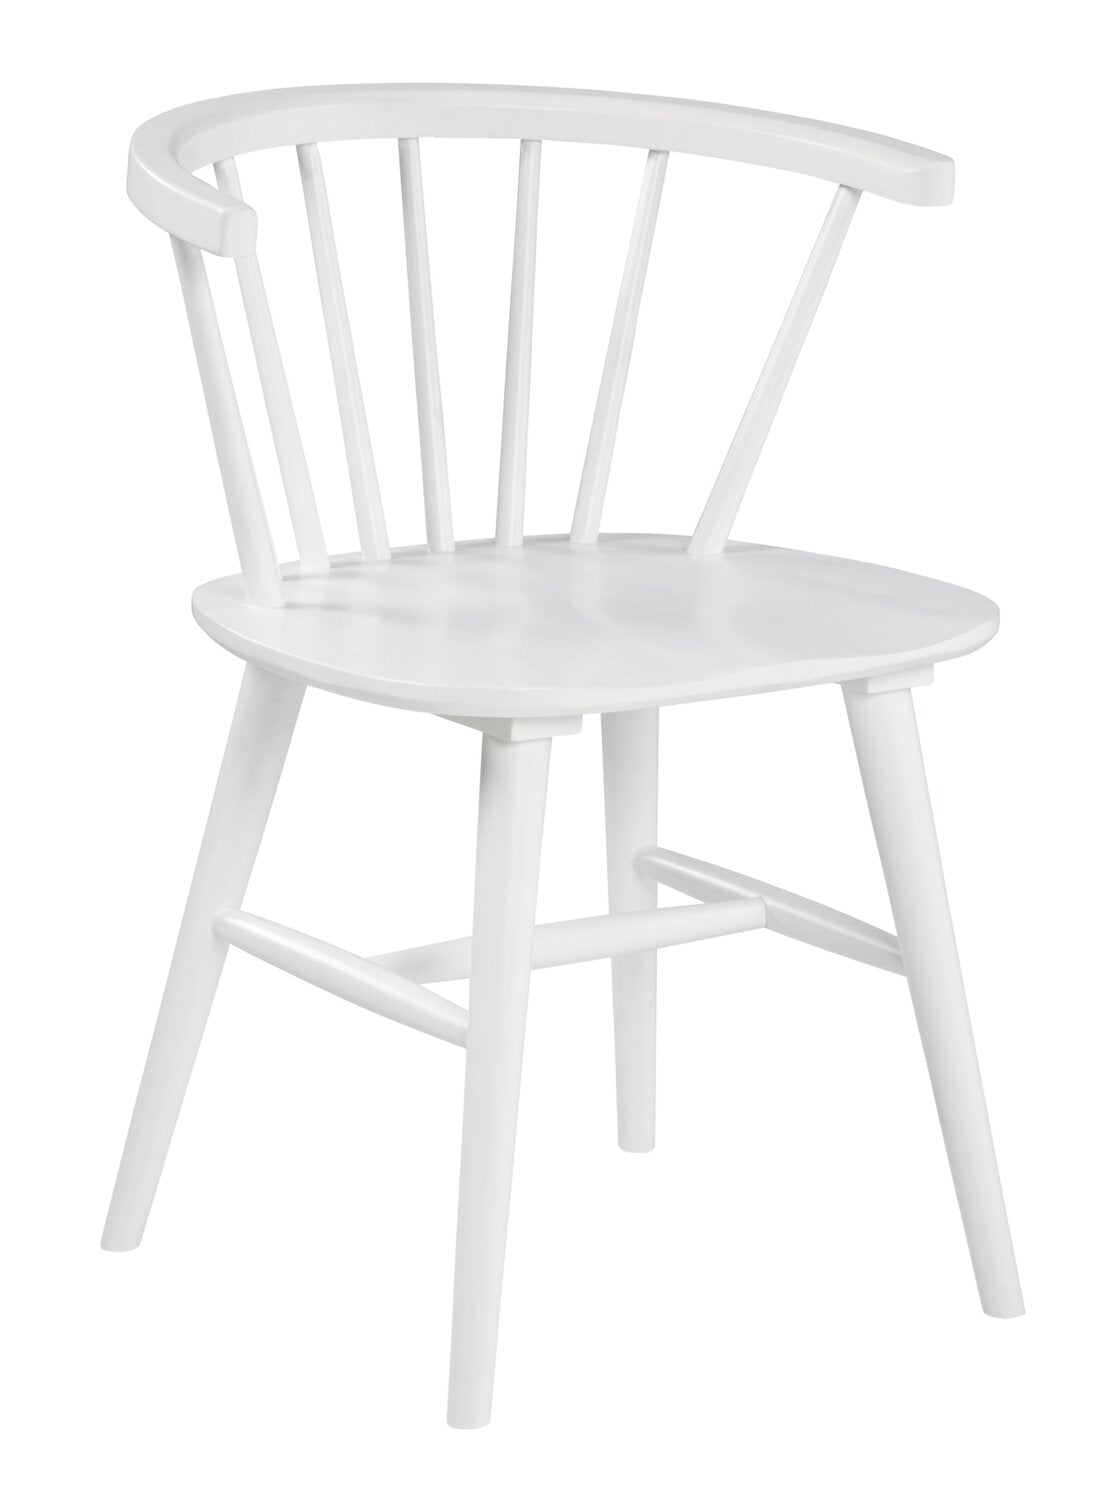 Telos 5-Piece Dining Package - White